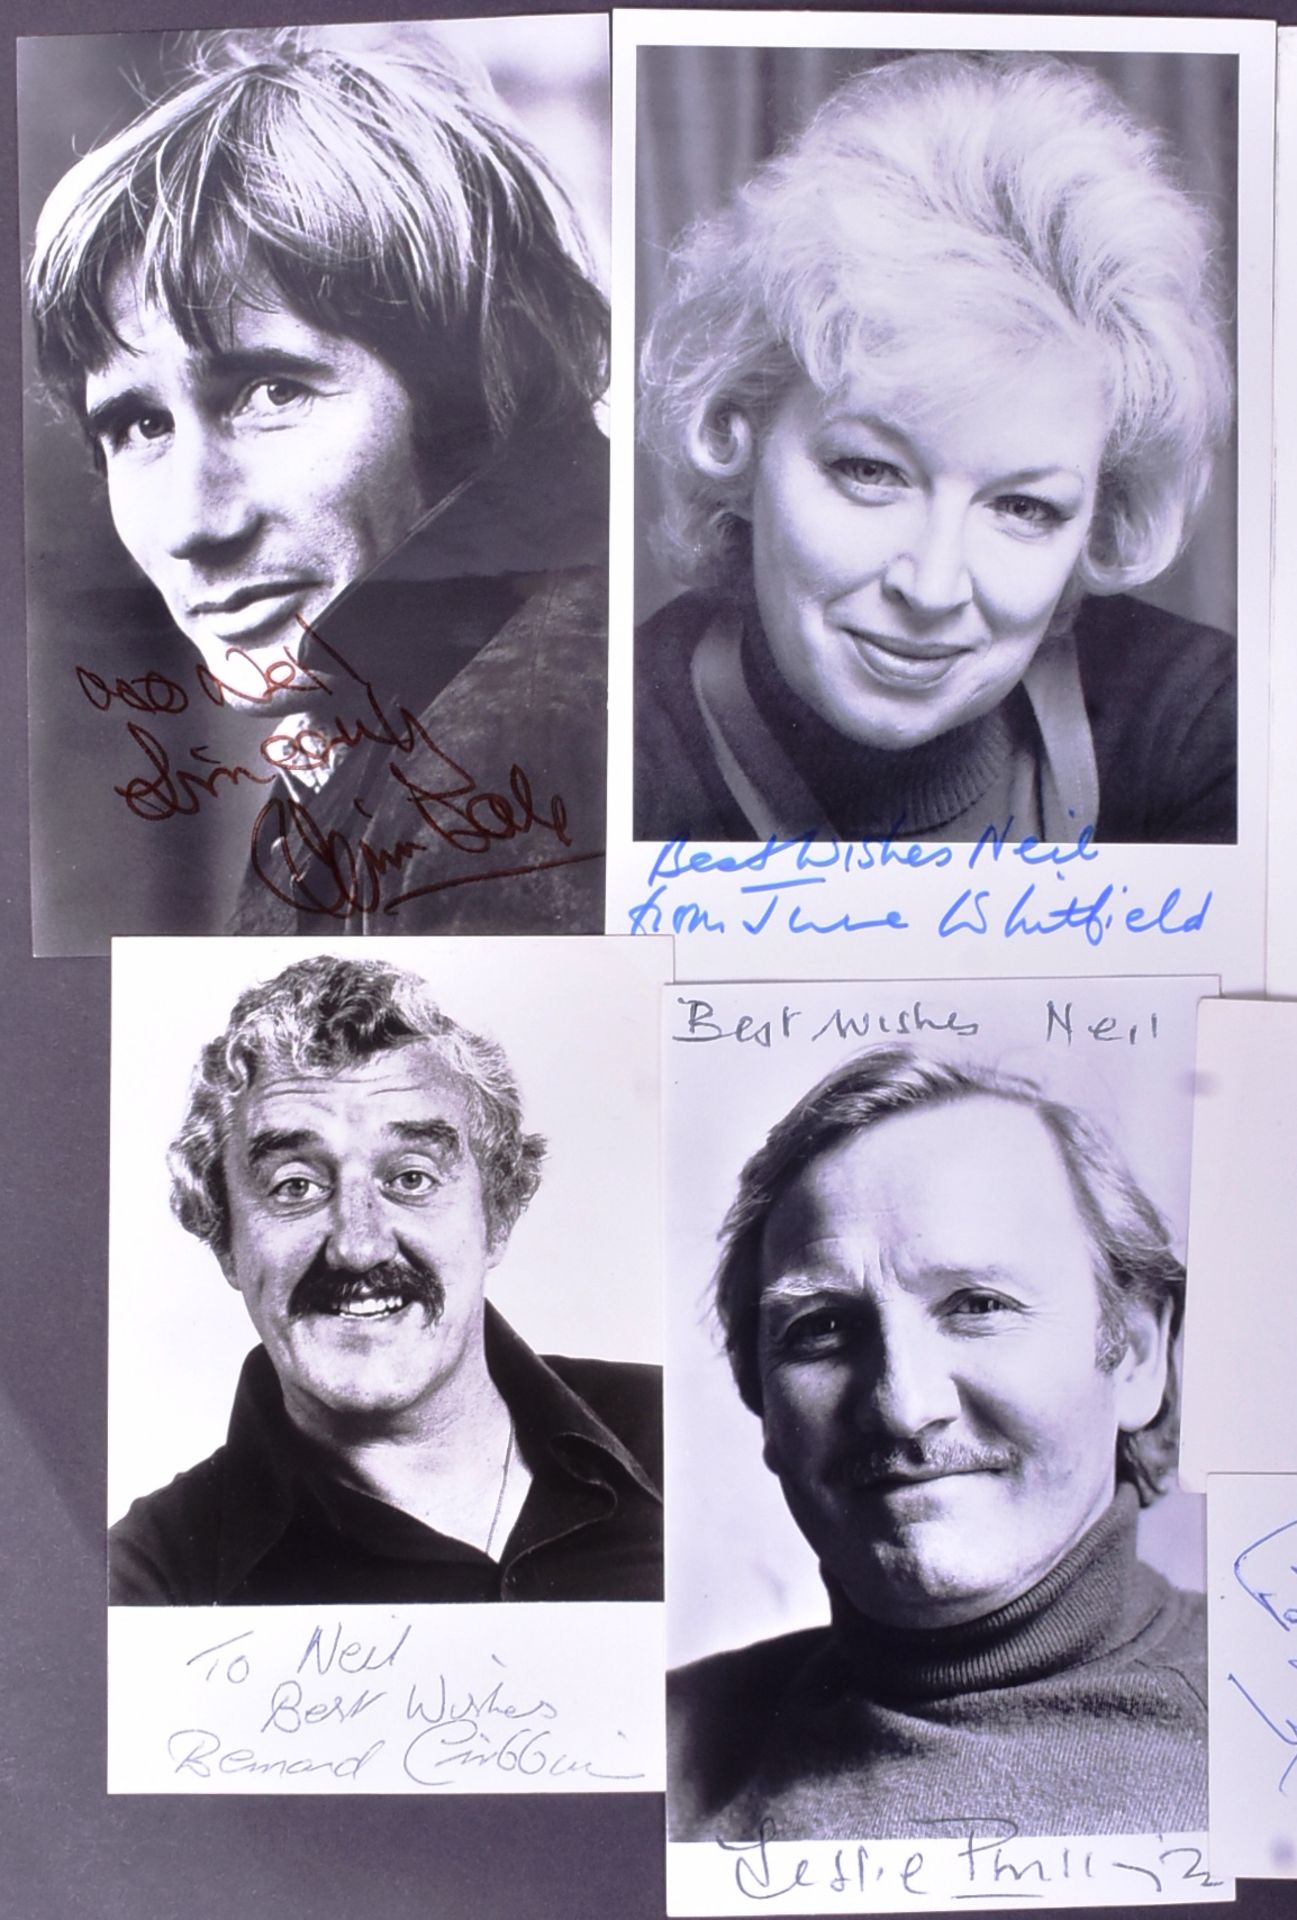 CARRY ON - CAST MEMBER AUTOGRAPHS - Image 3 of 4